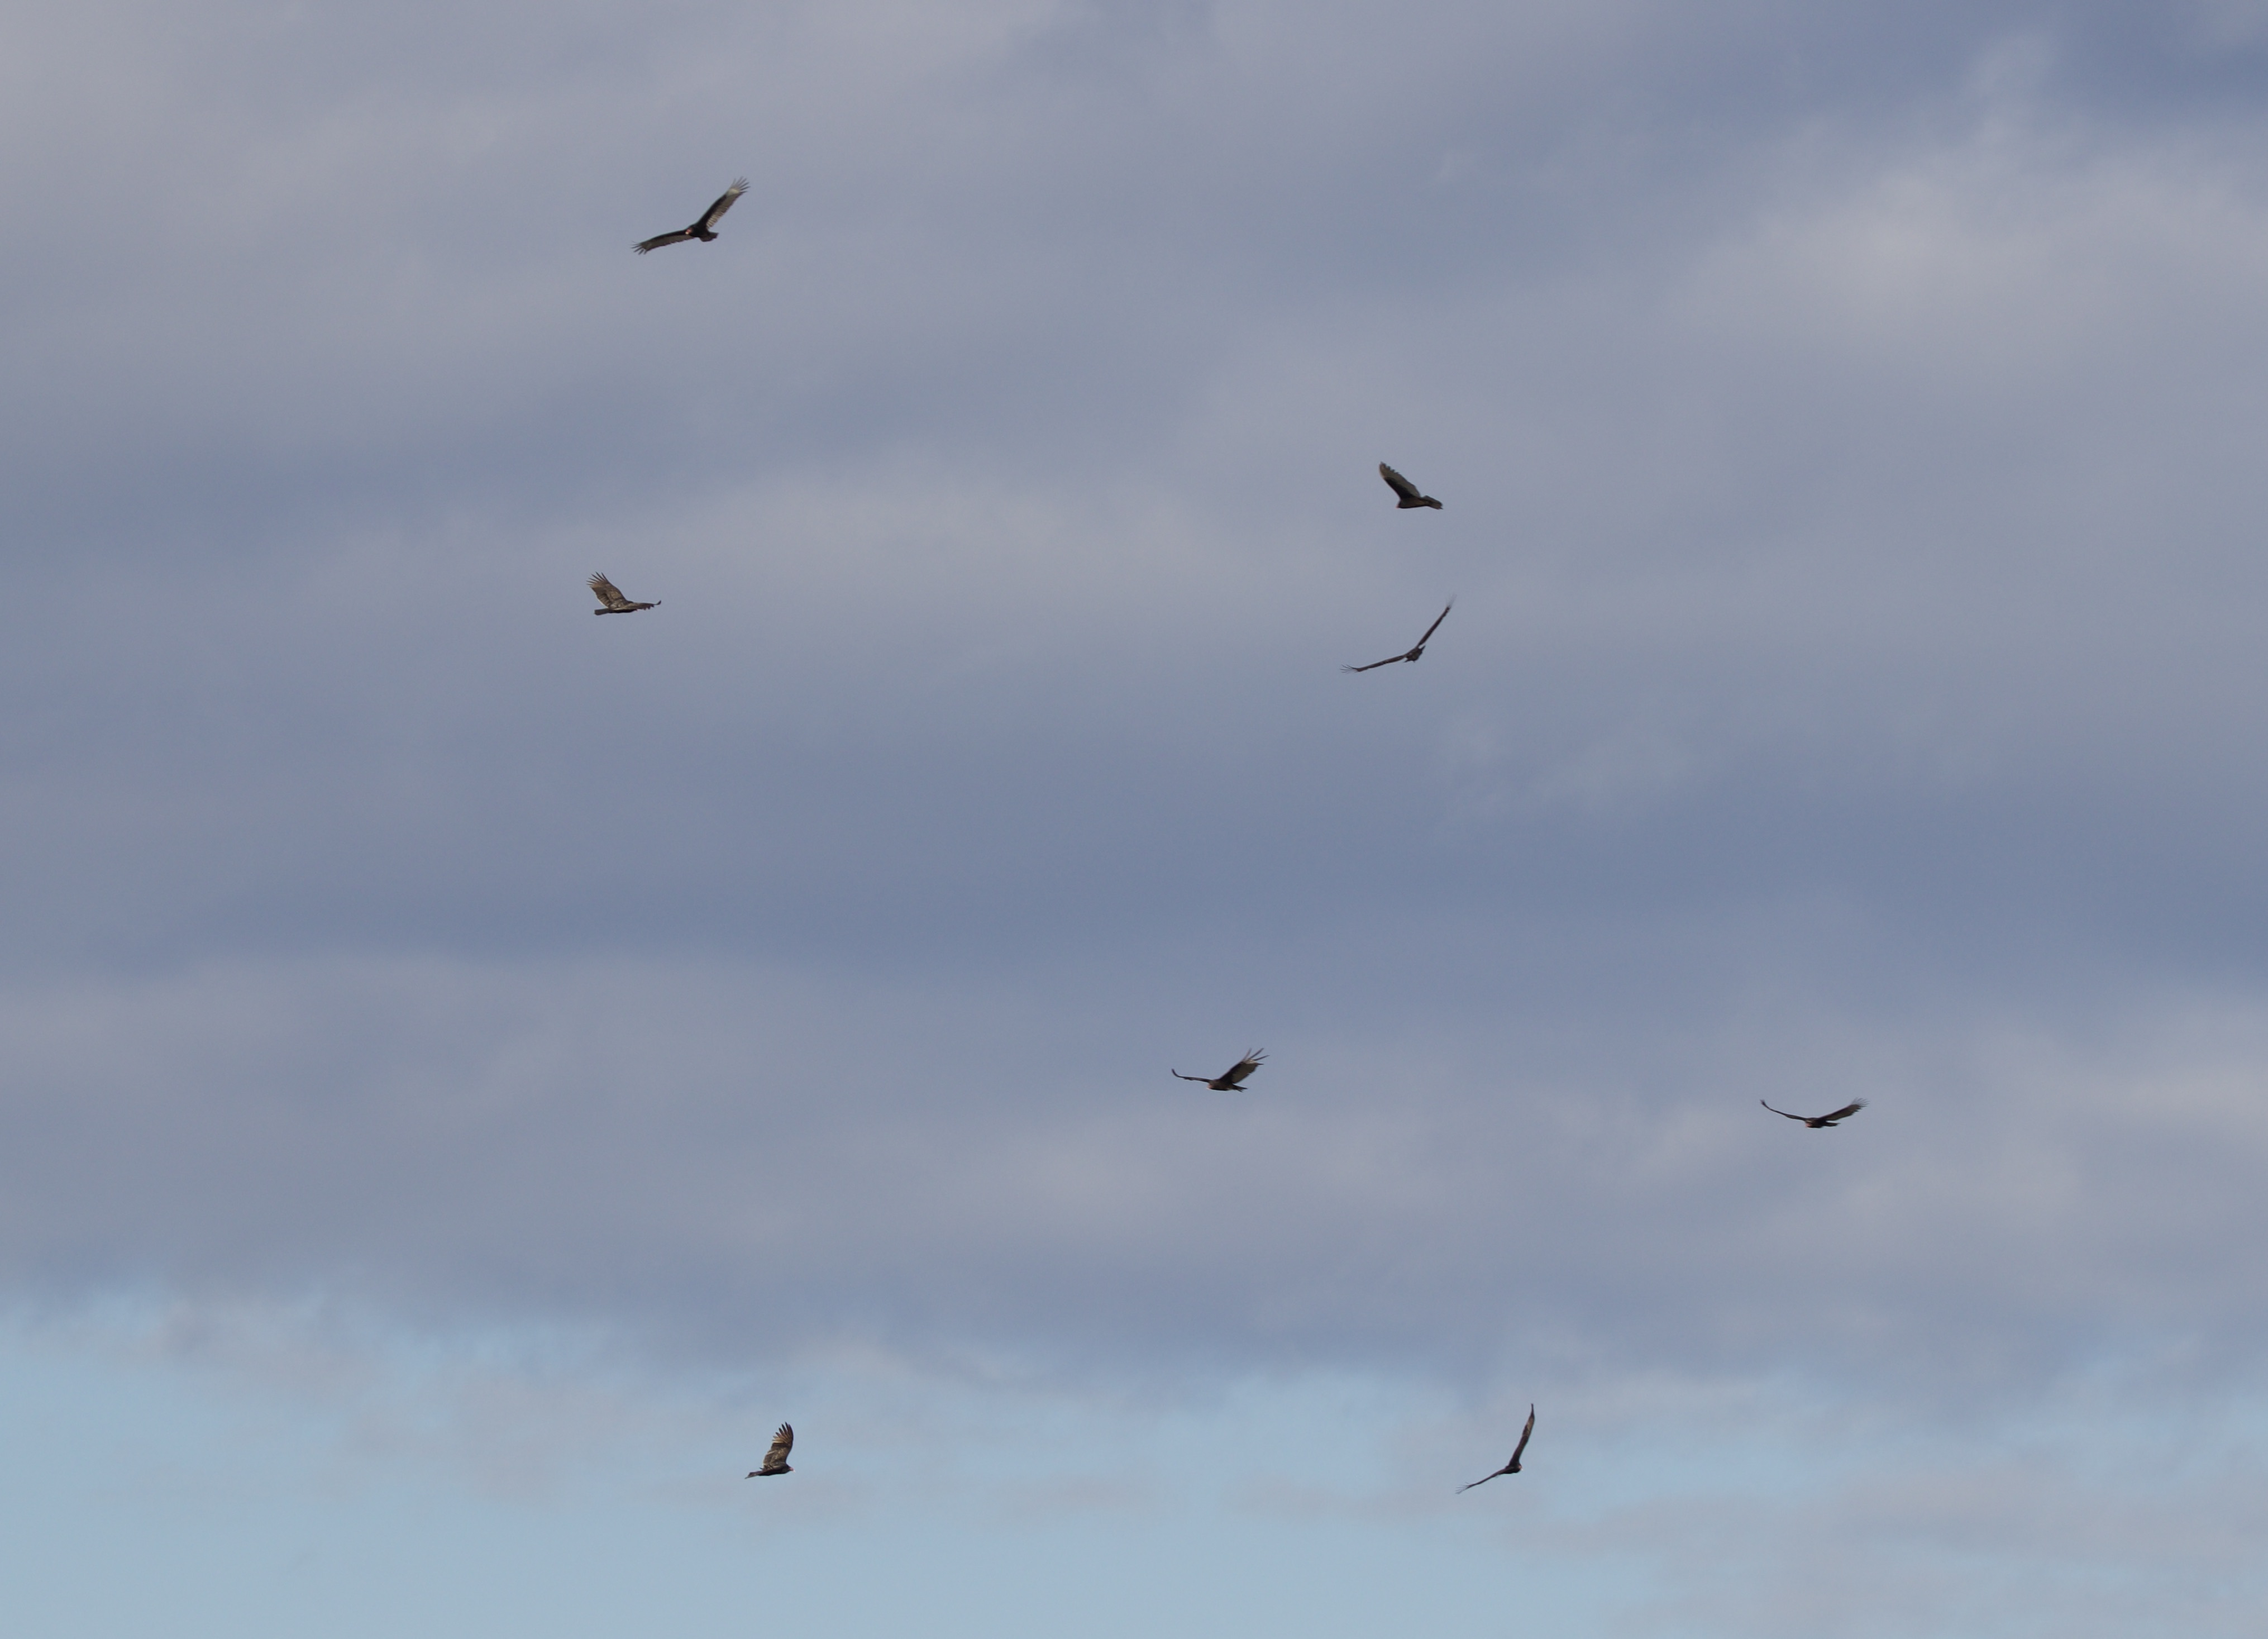 A common occurrence recently has been this scene; over a dozen of turkey vultures in the sky in Sag Harbor.    TERRY SULLIVAN